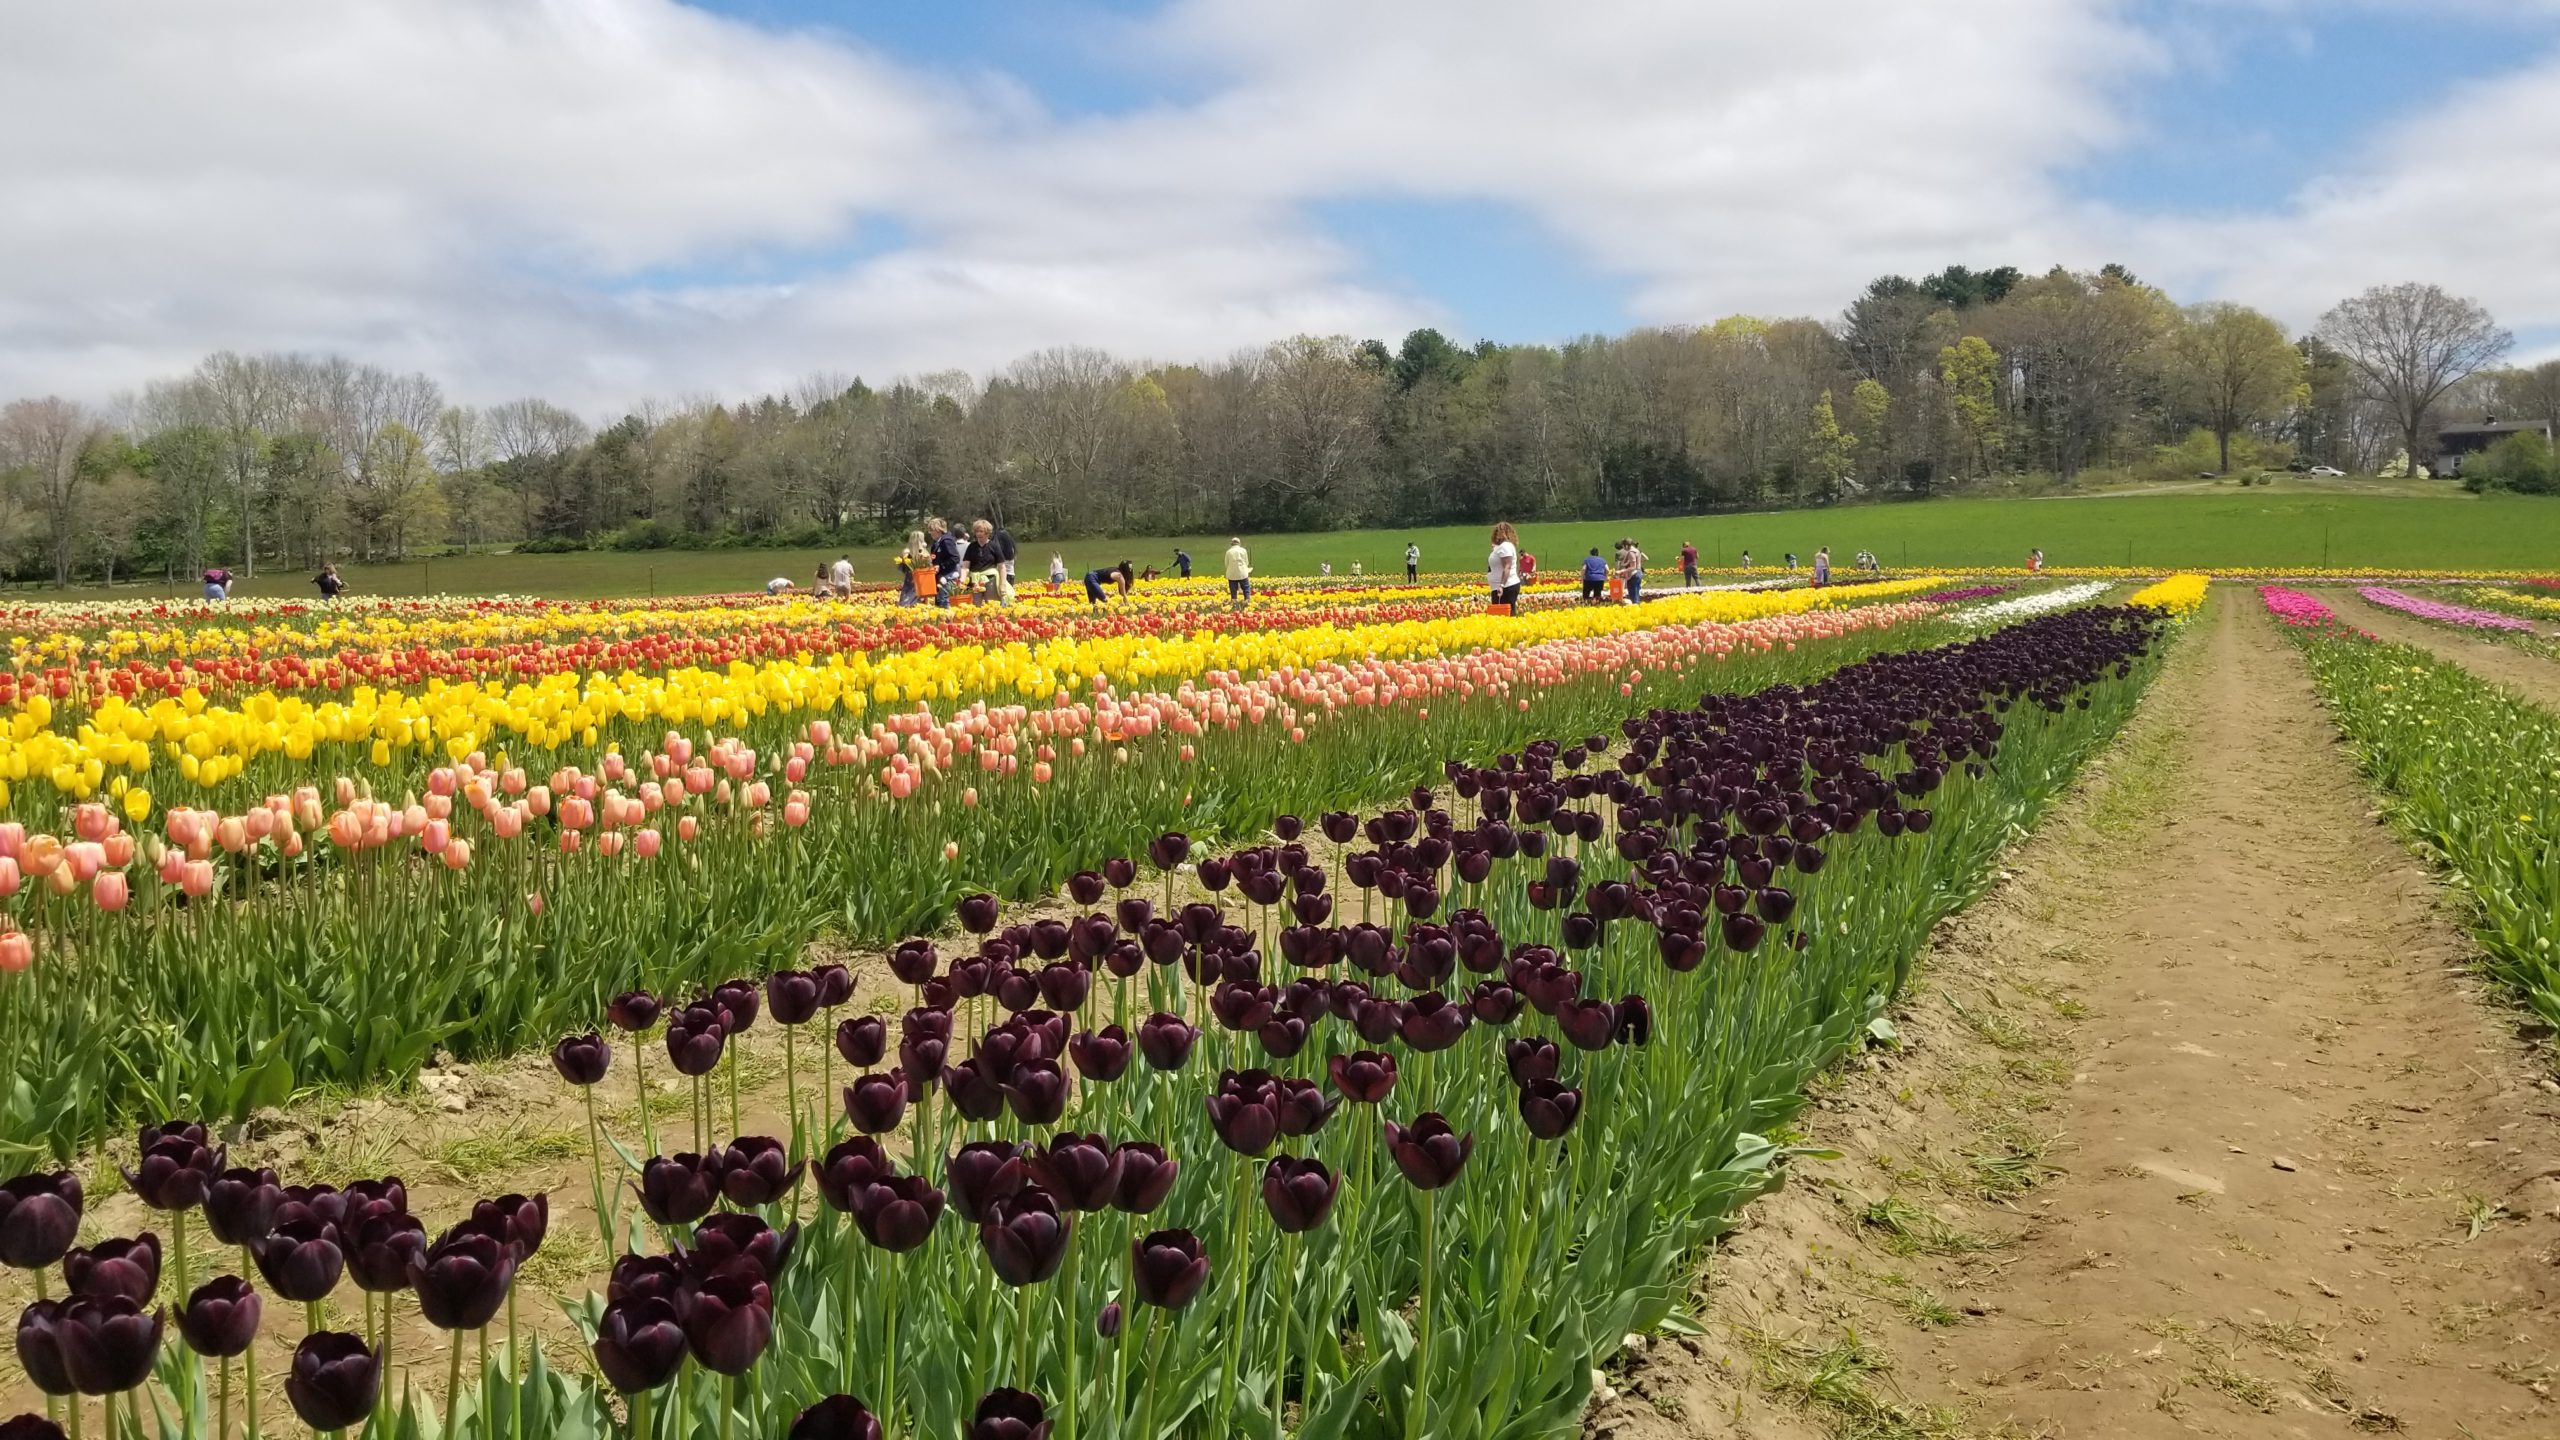 Group of tourists admiring the Wicked Tulips Farm - a destination included in the Springtime in Rhode Island Tour.